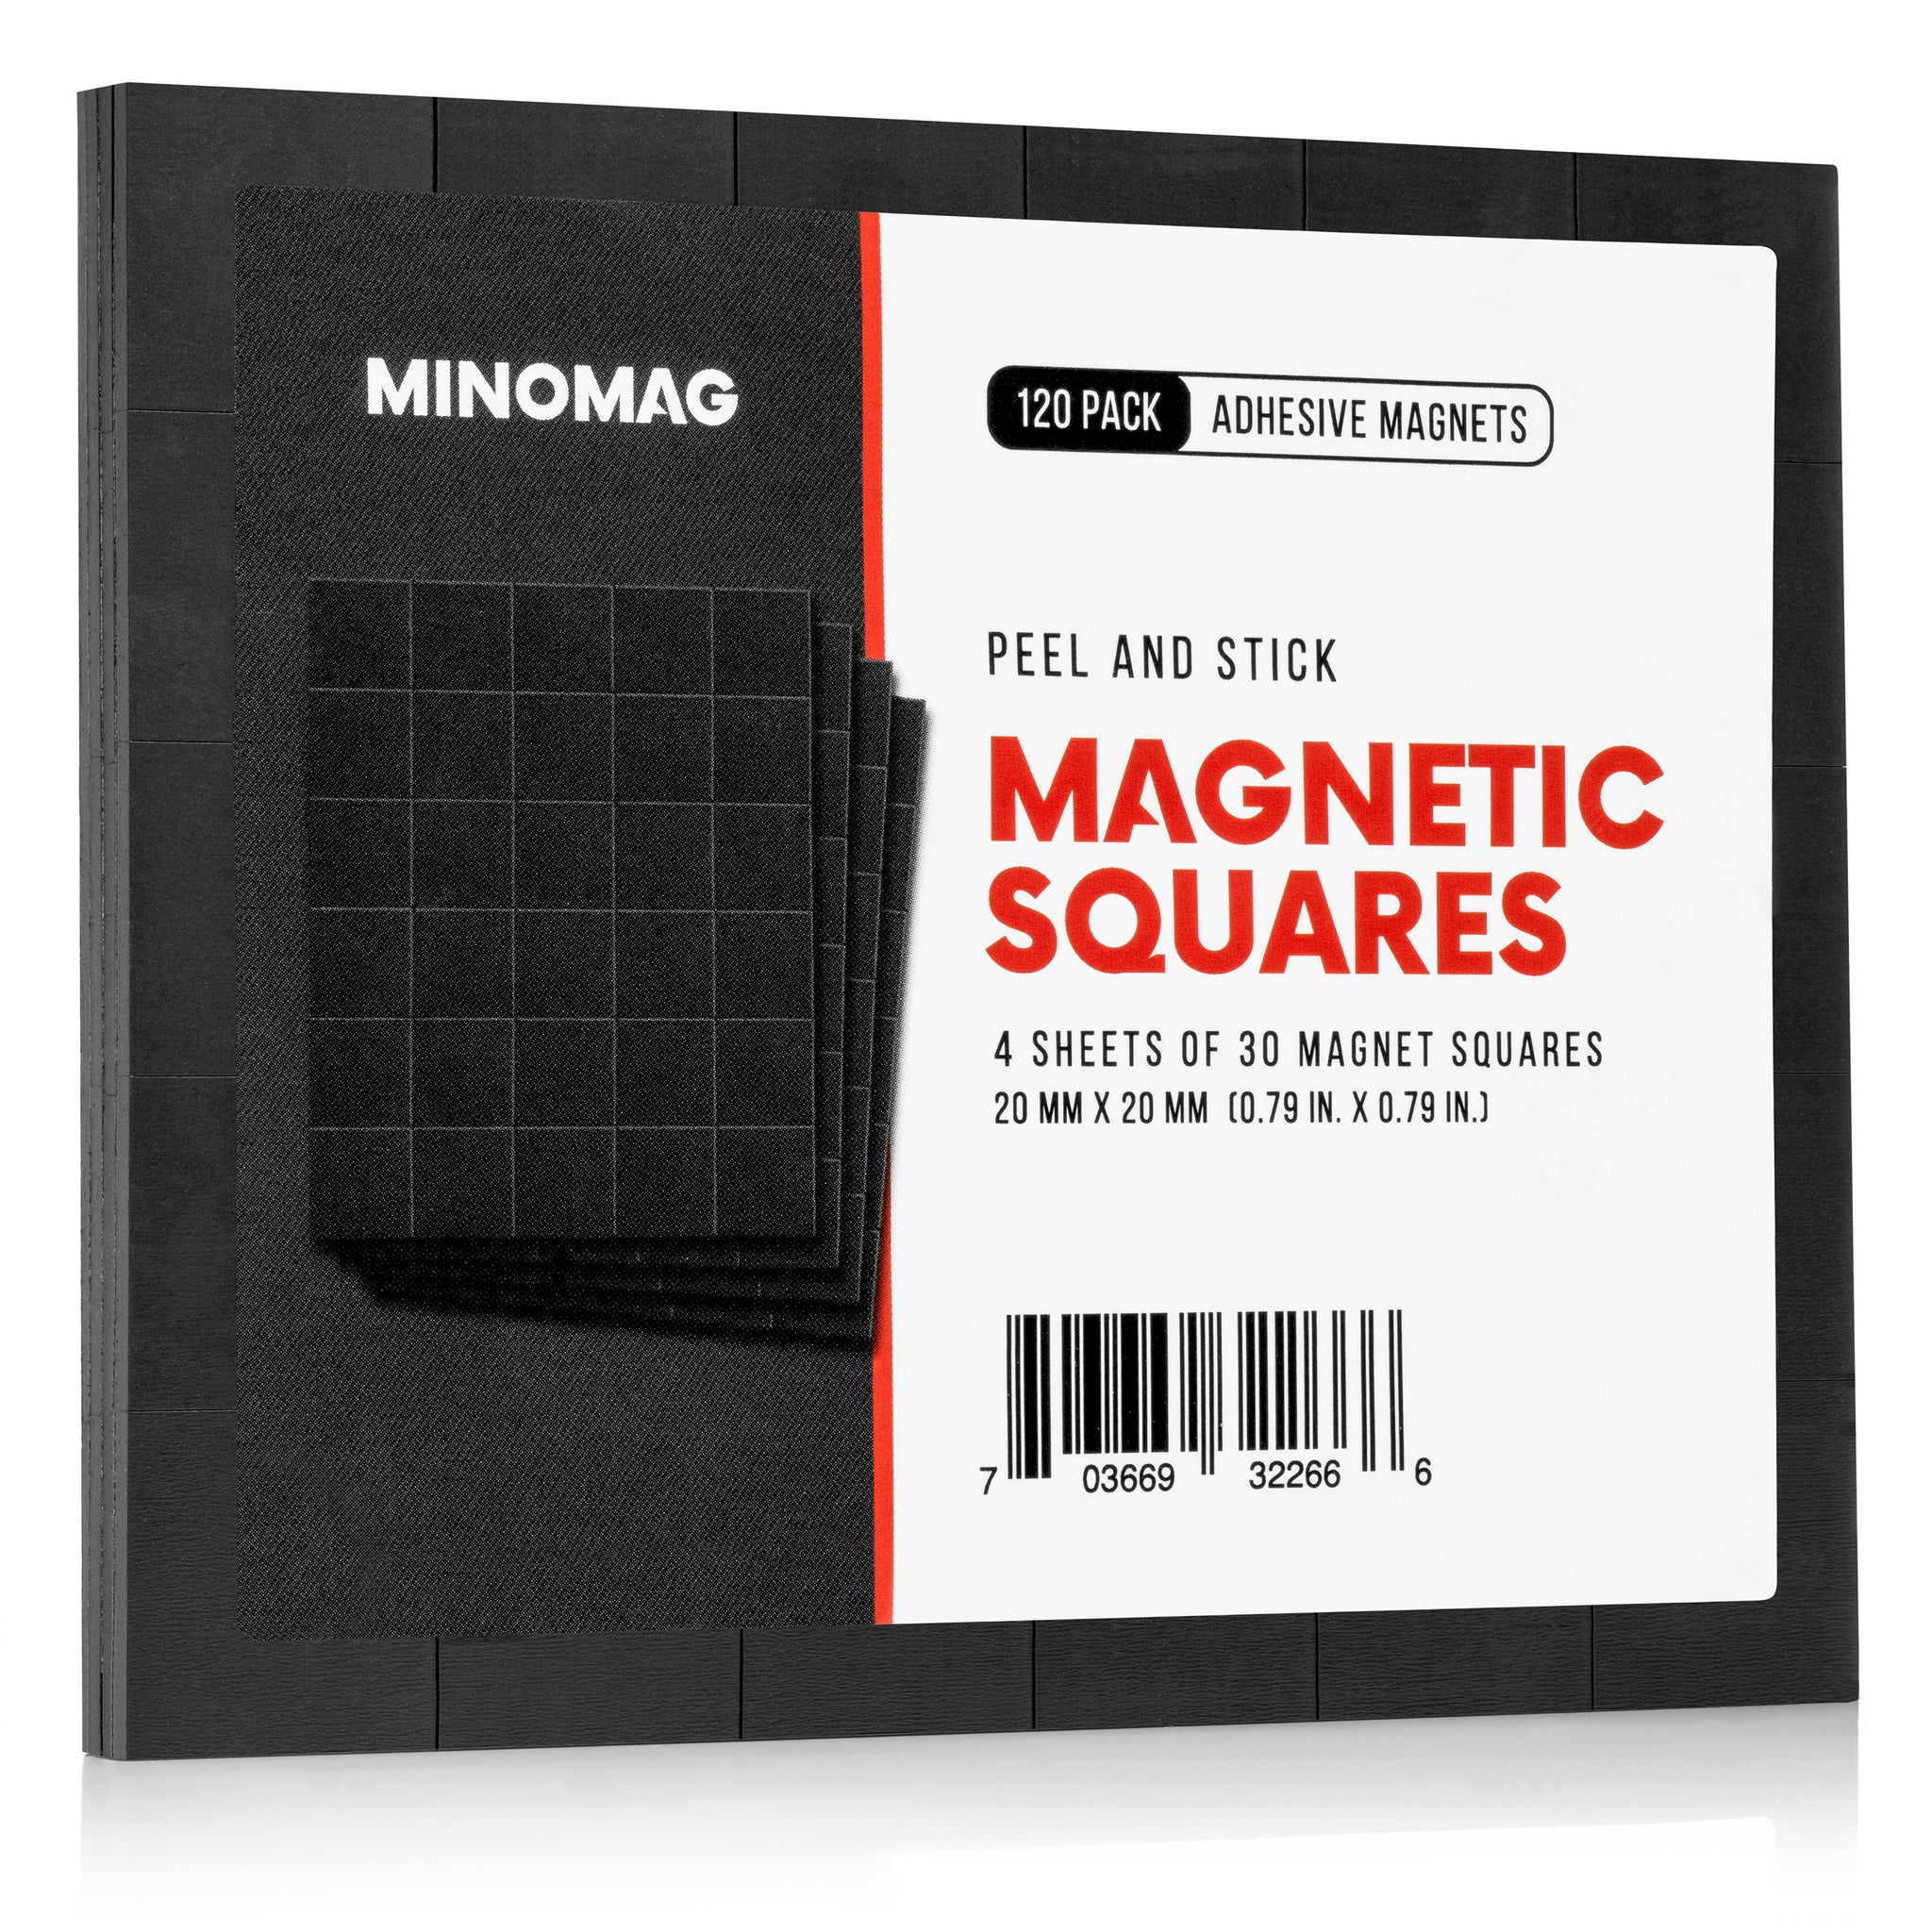 Adhesive Magnetic Squares - Sticky Magnets - Adhesive Magnets - Magnetic  Tape - Magnetic Stickers - 90 PCs